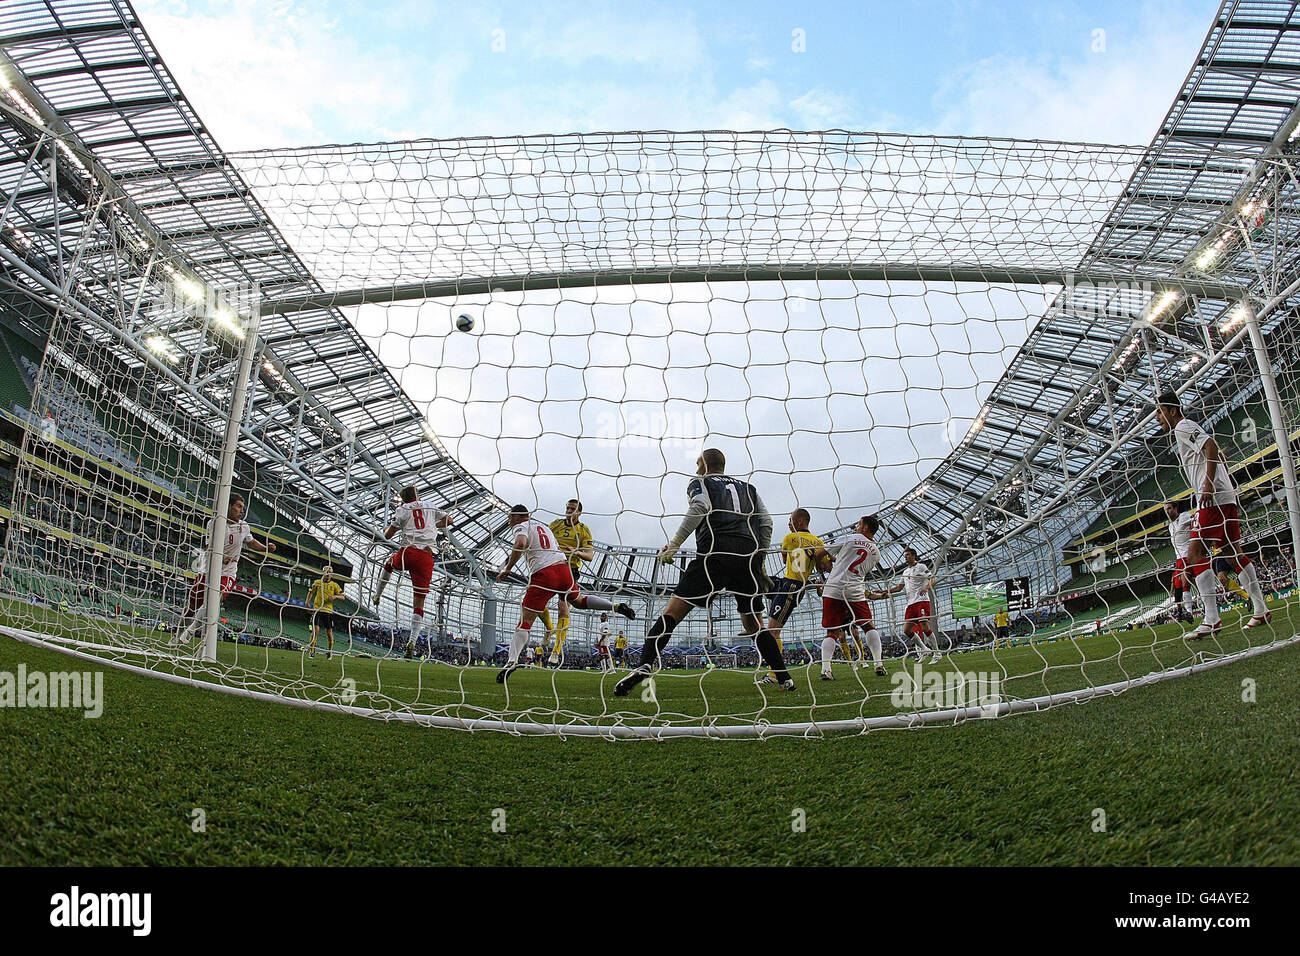 Soccer - Nations Cup - Wales v Scotland - Aviva Stadium. A General view of the match action during the Nations Cup match at the Aviva Stadium, Dublin. Stock Photo